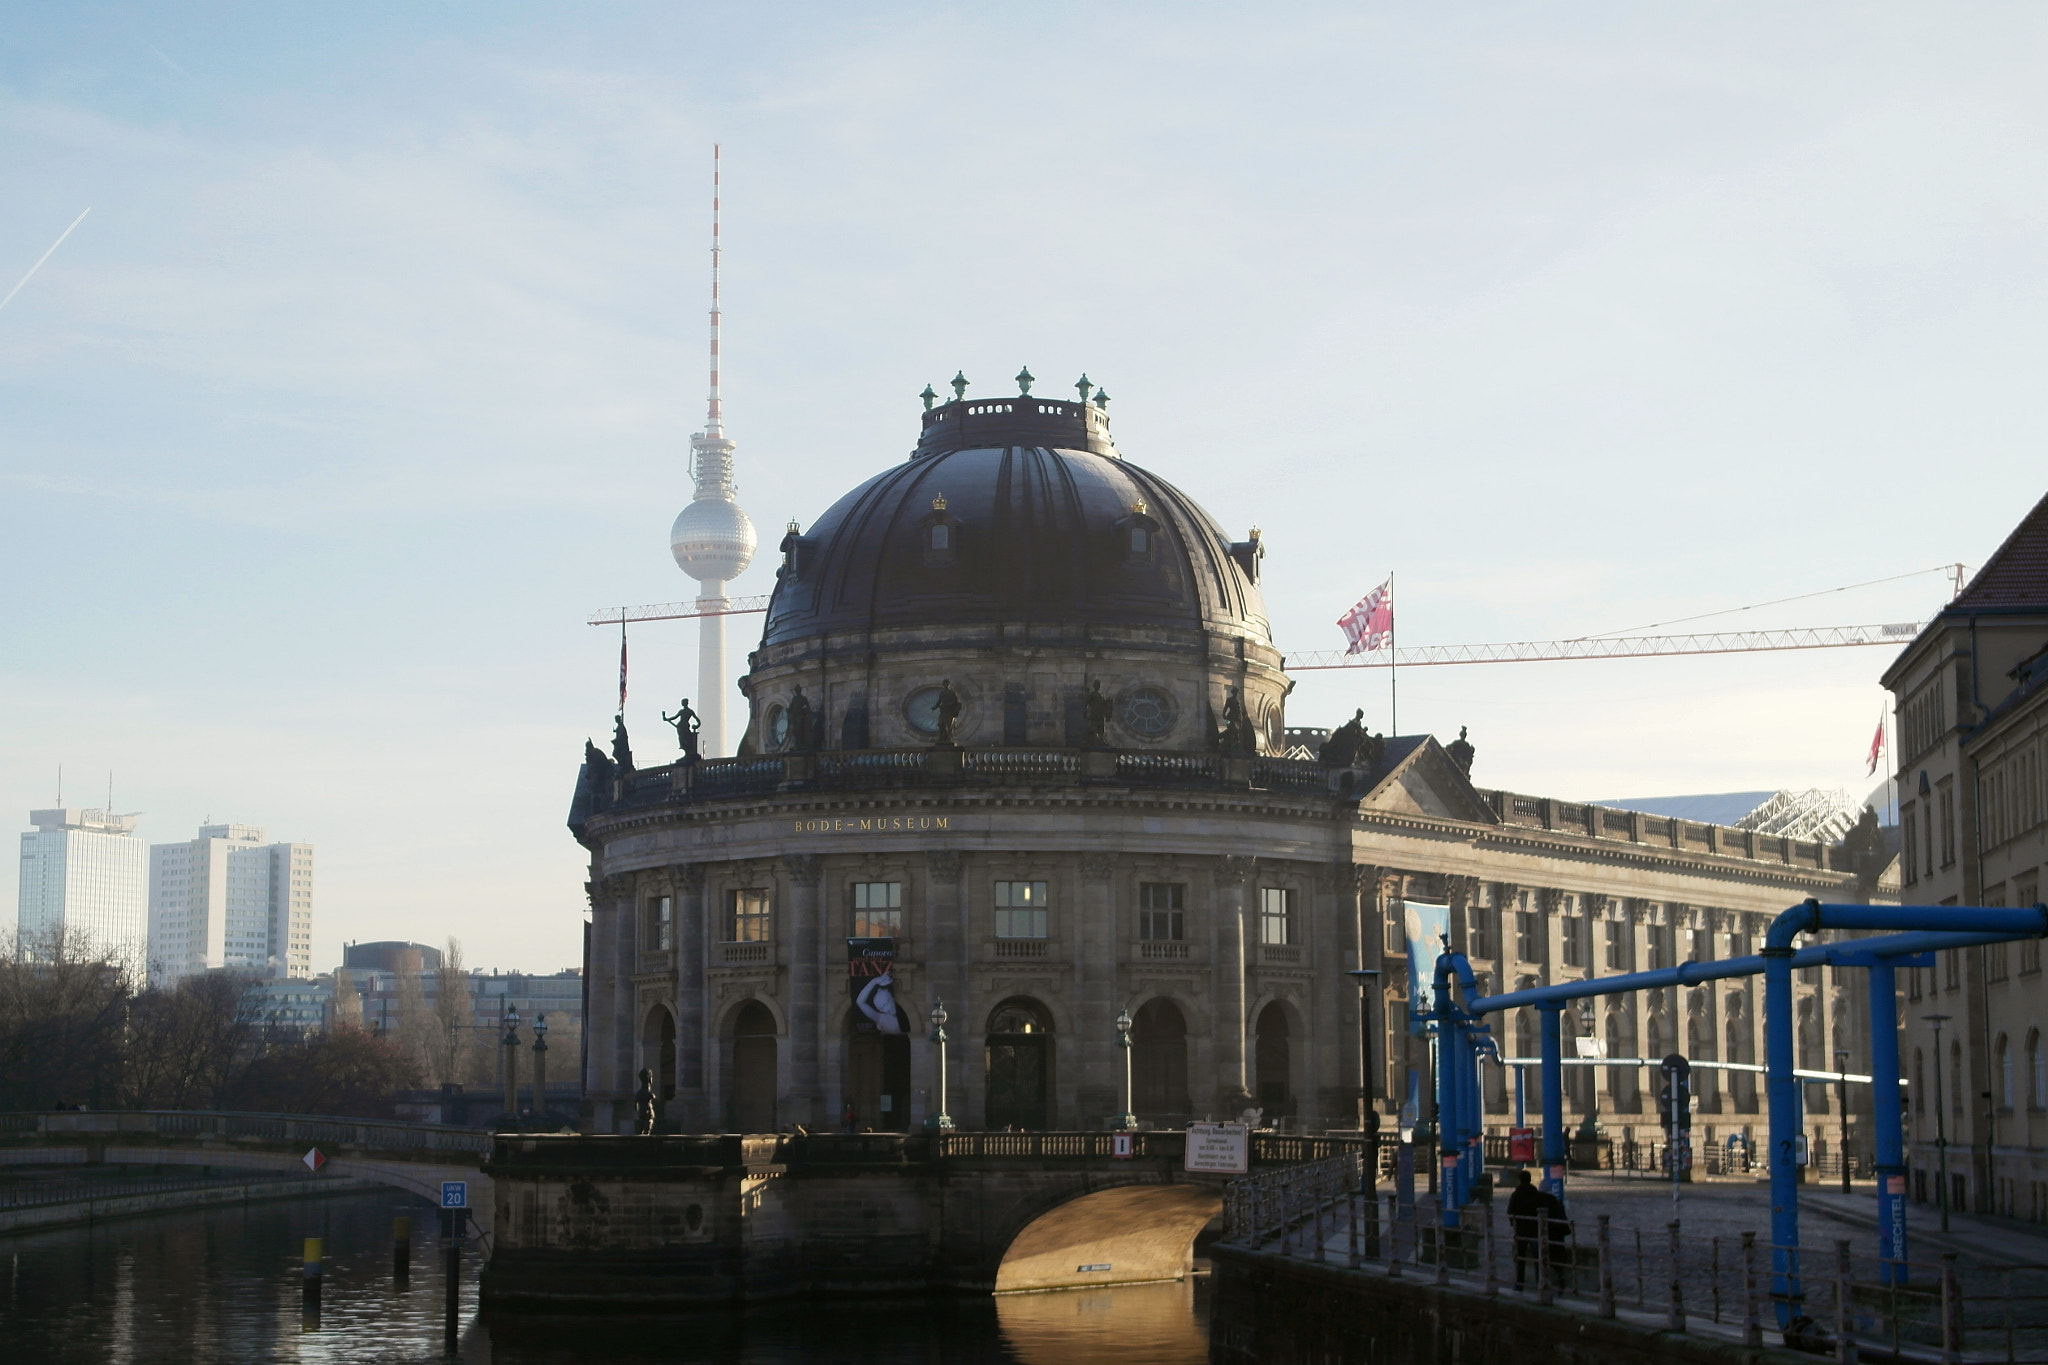 Samsung NX200 sample photo. Bode museum and television tower photography